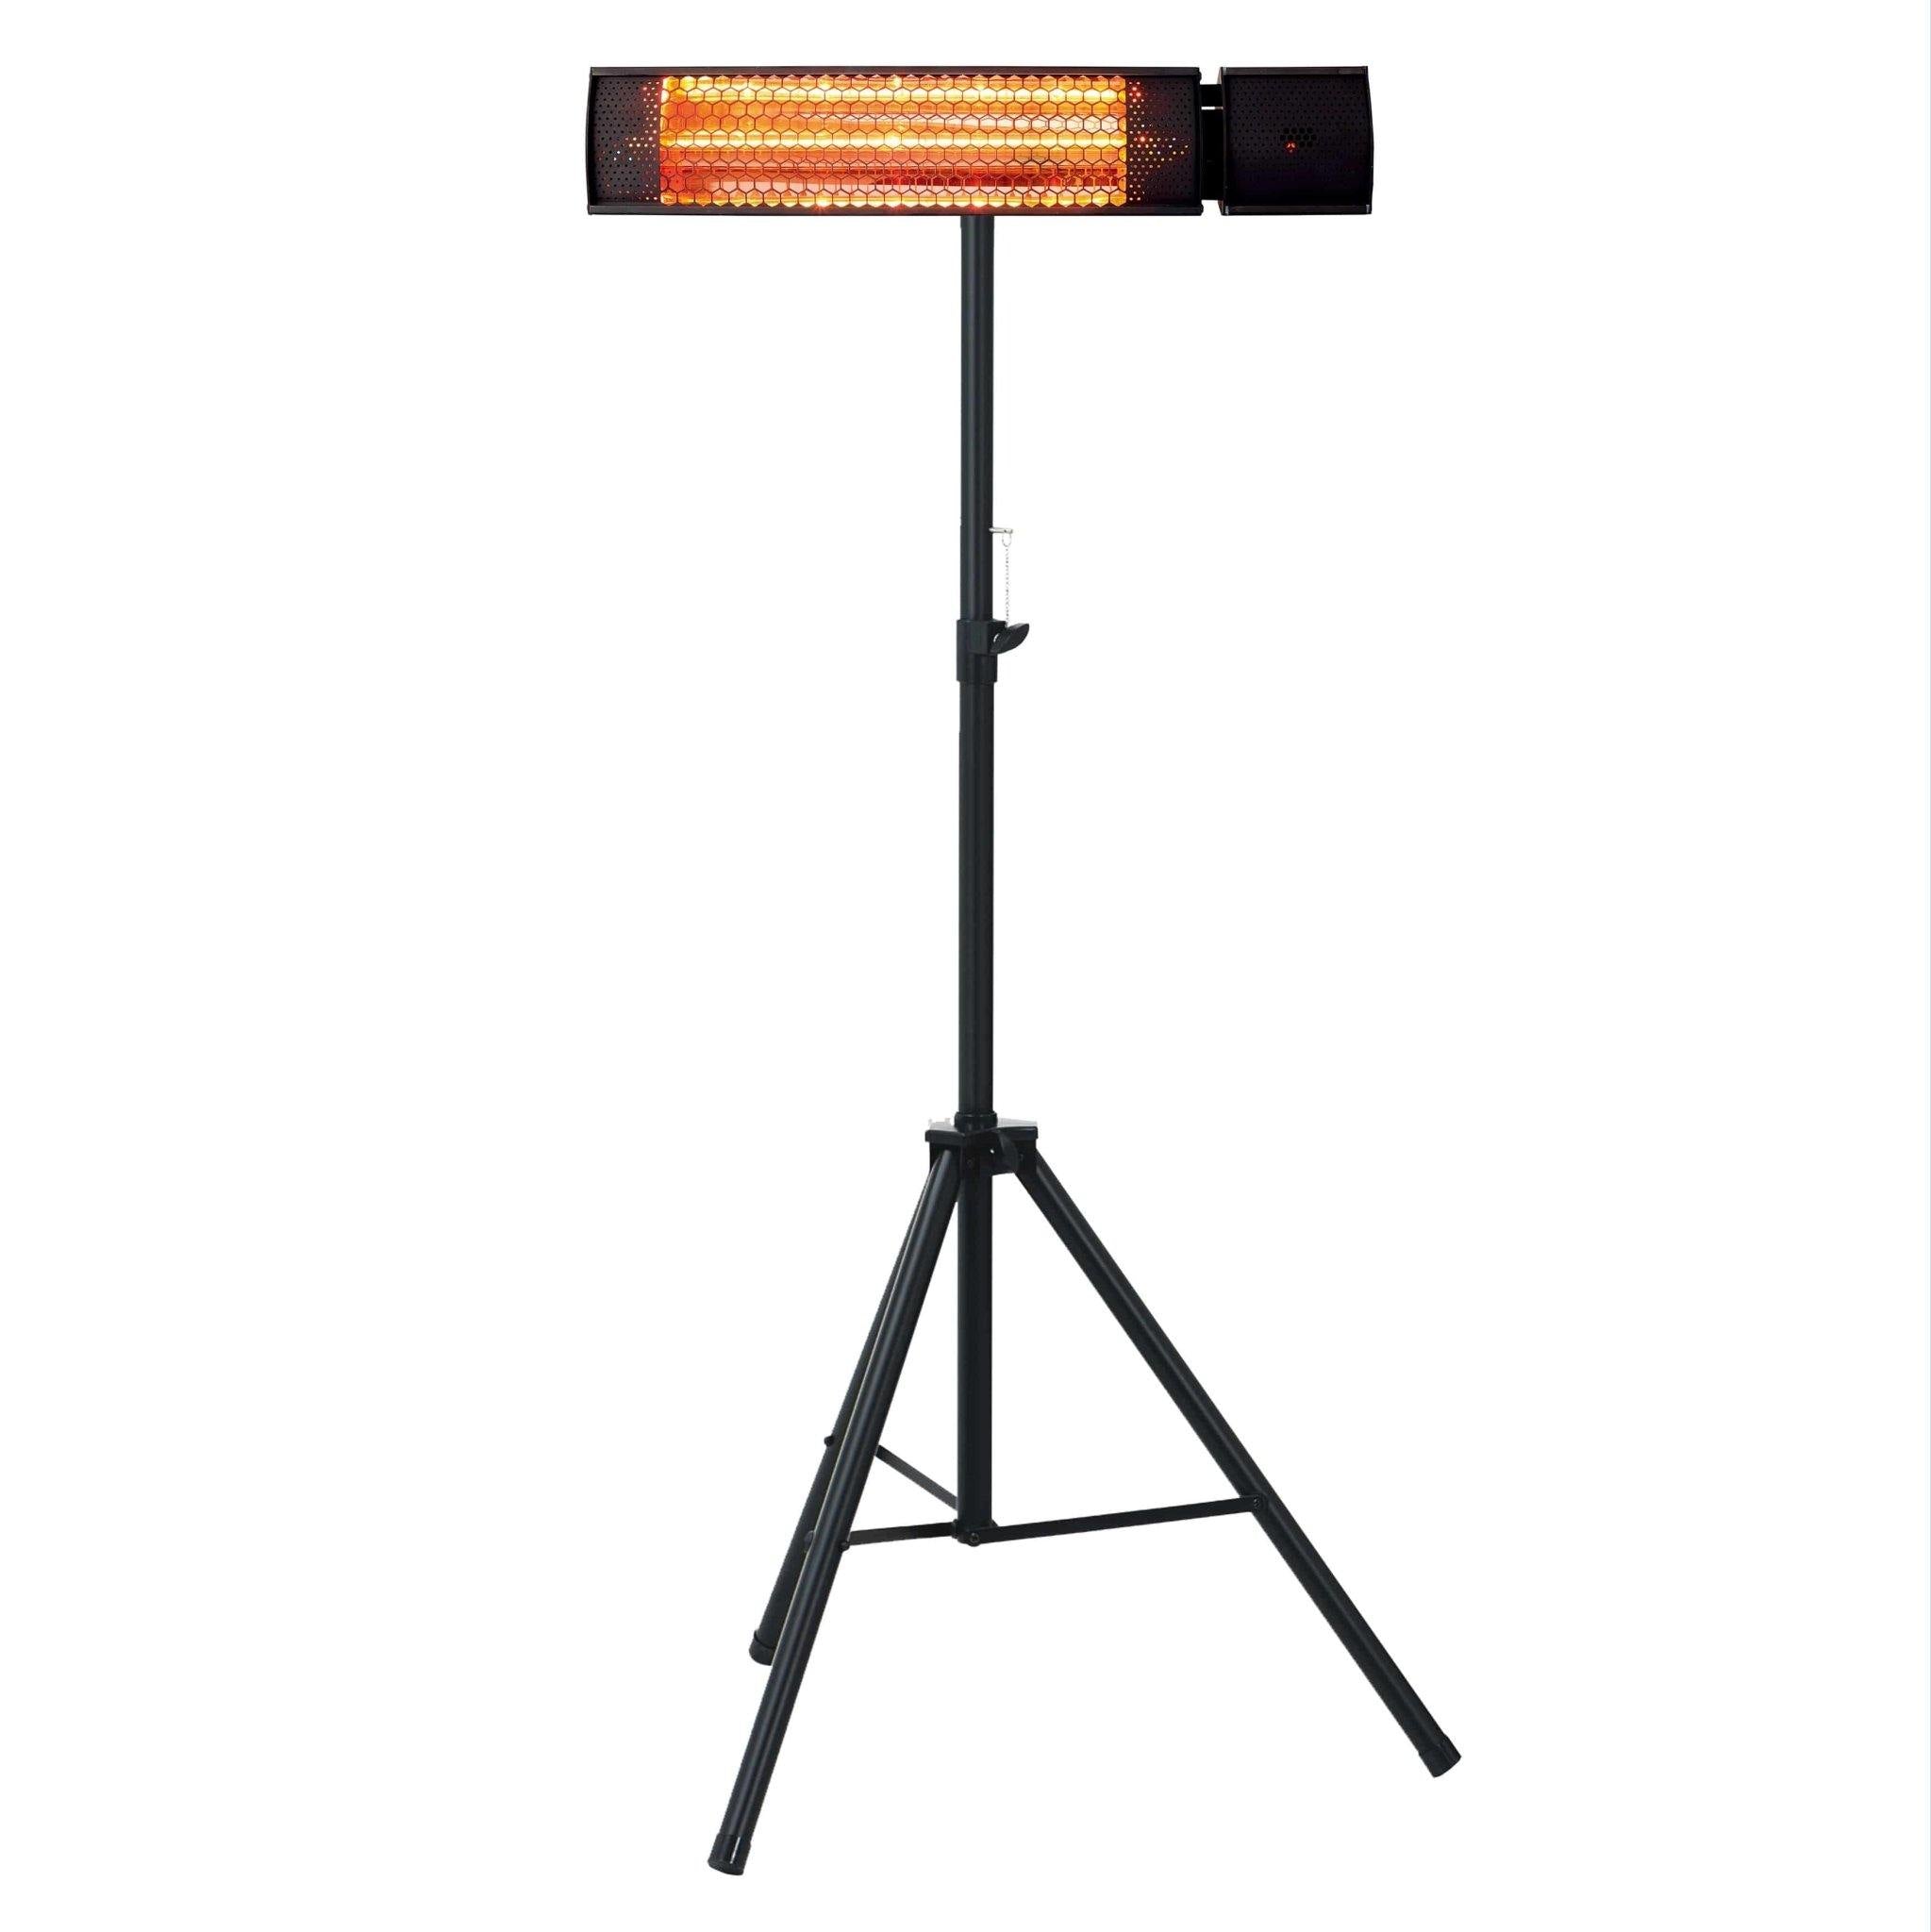 Electric Patio Heater with Tripod Stand - Dti Direct USA